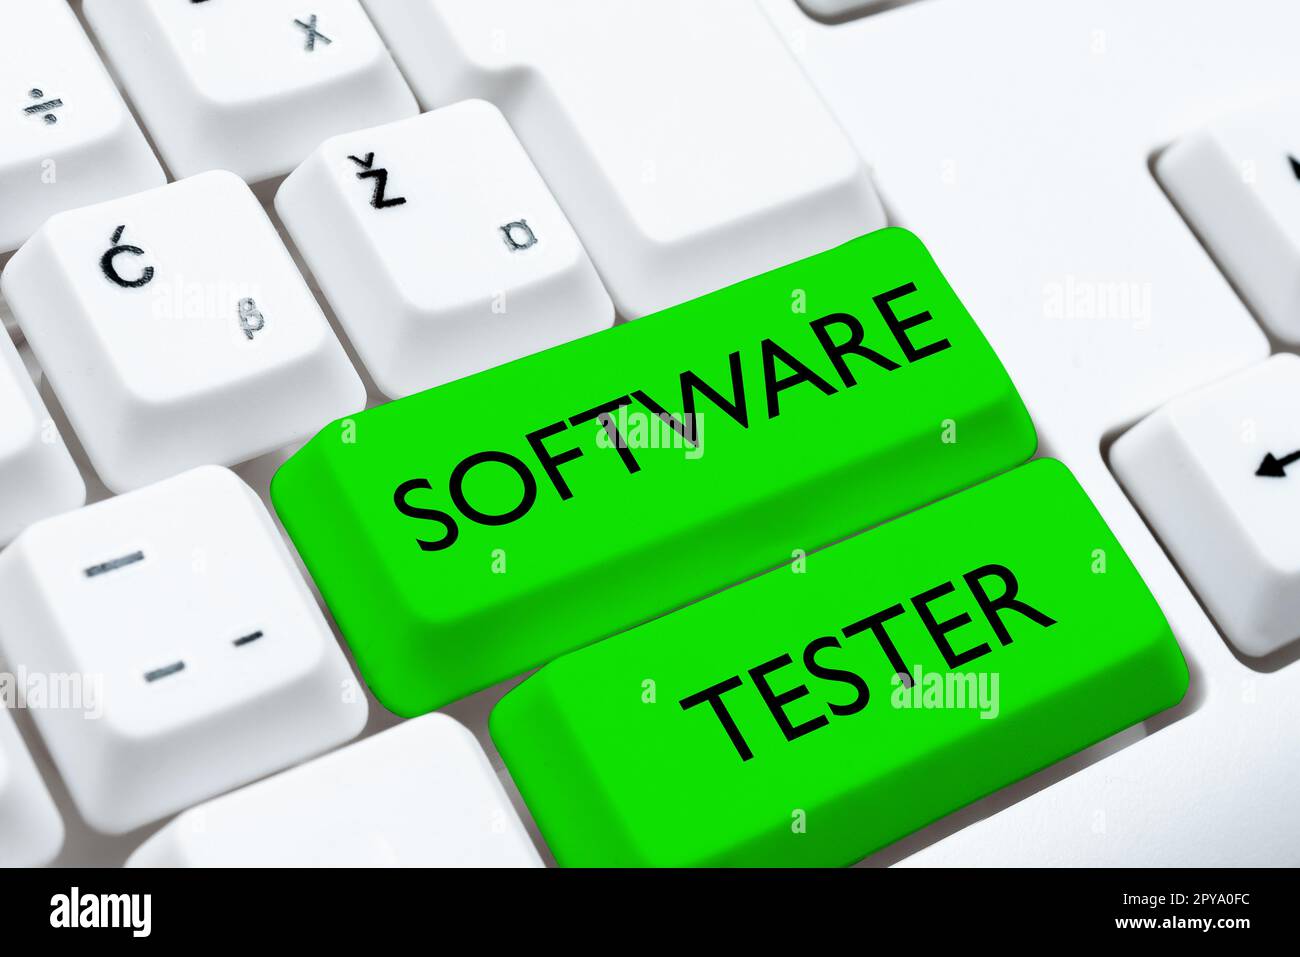 Conceptual caption Software Tester. Business idea implemented to protect software against malicious attack Stock Photo